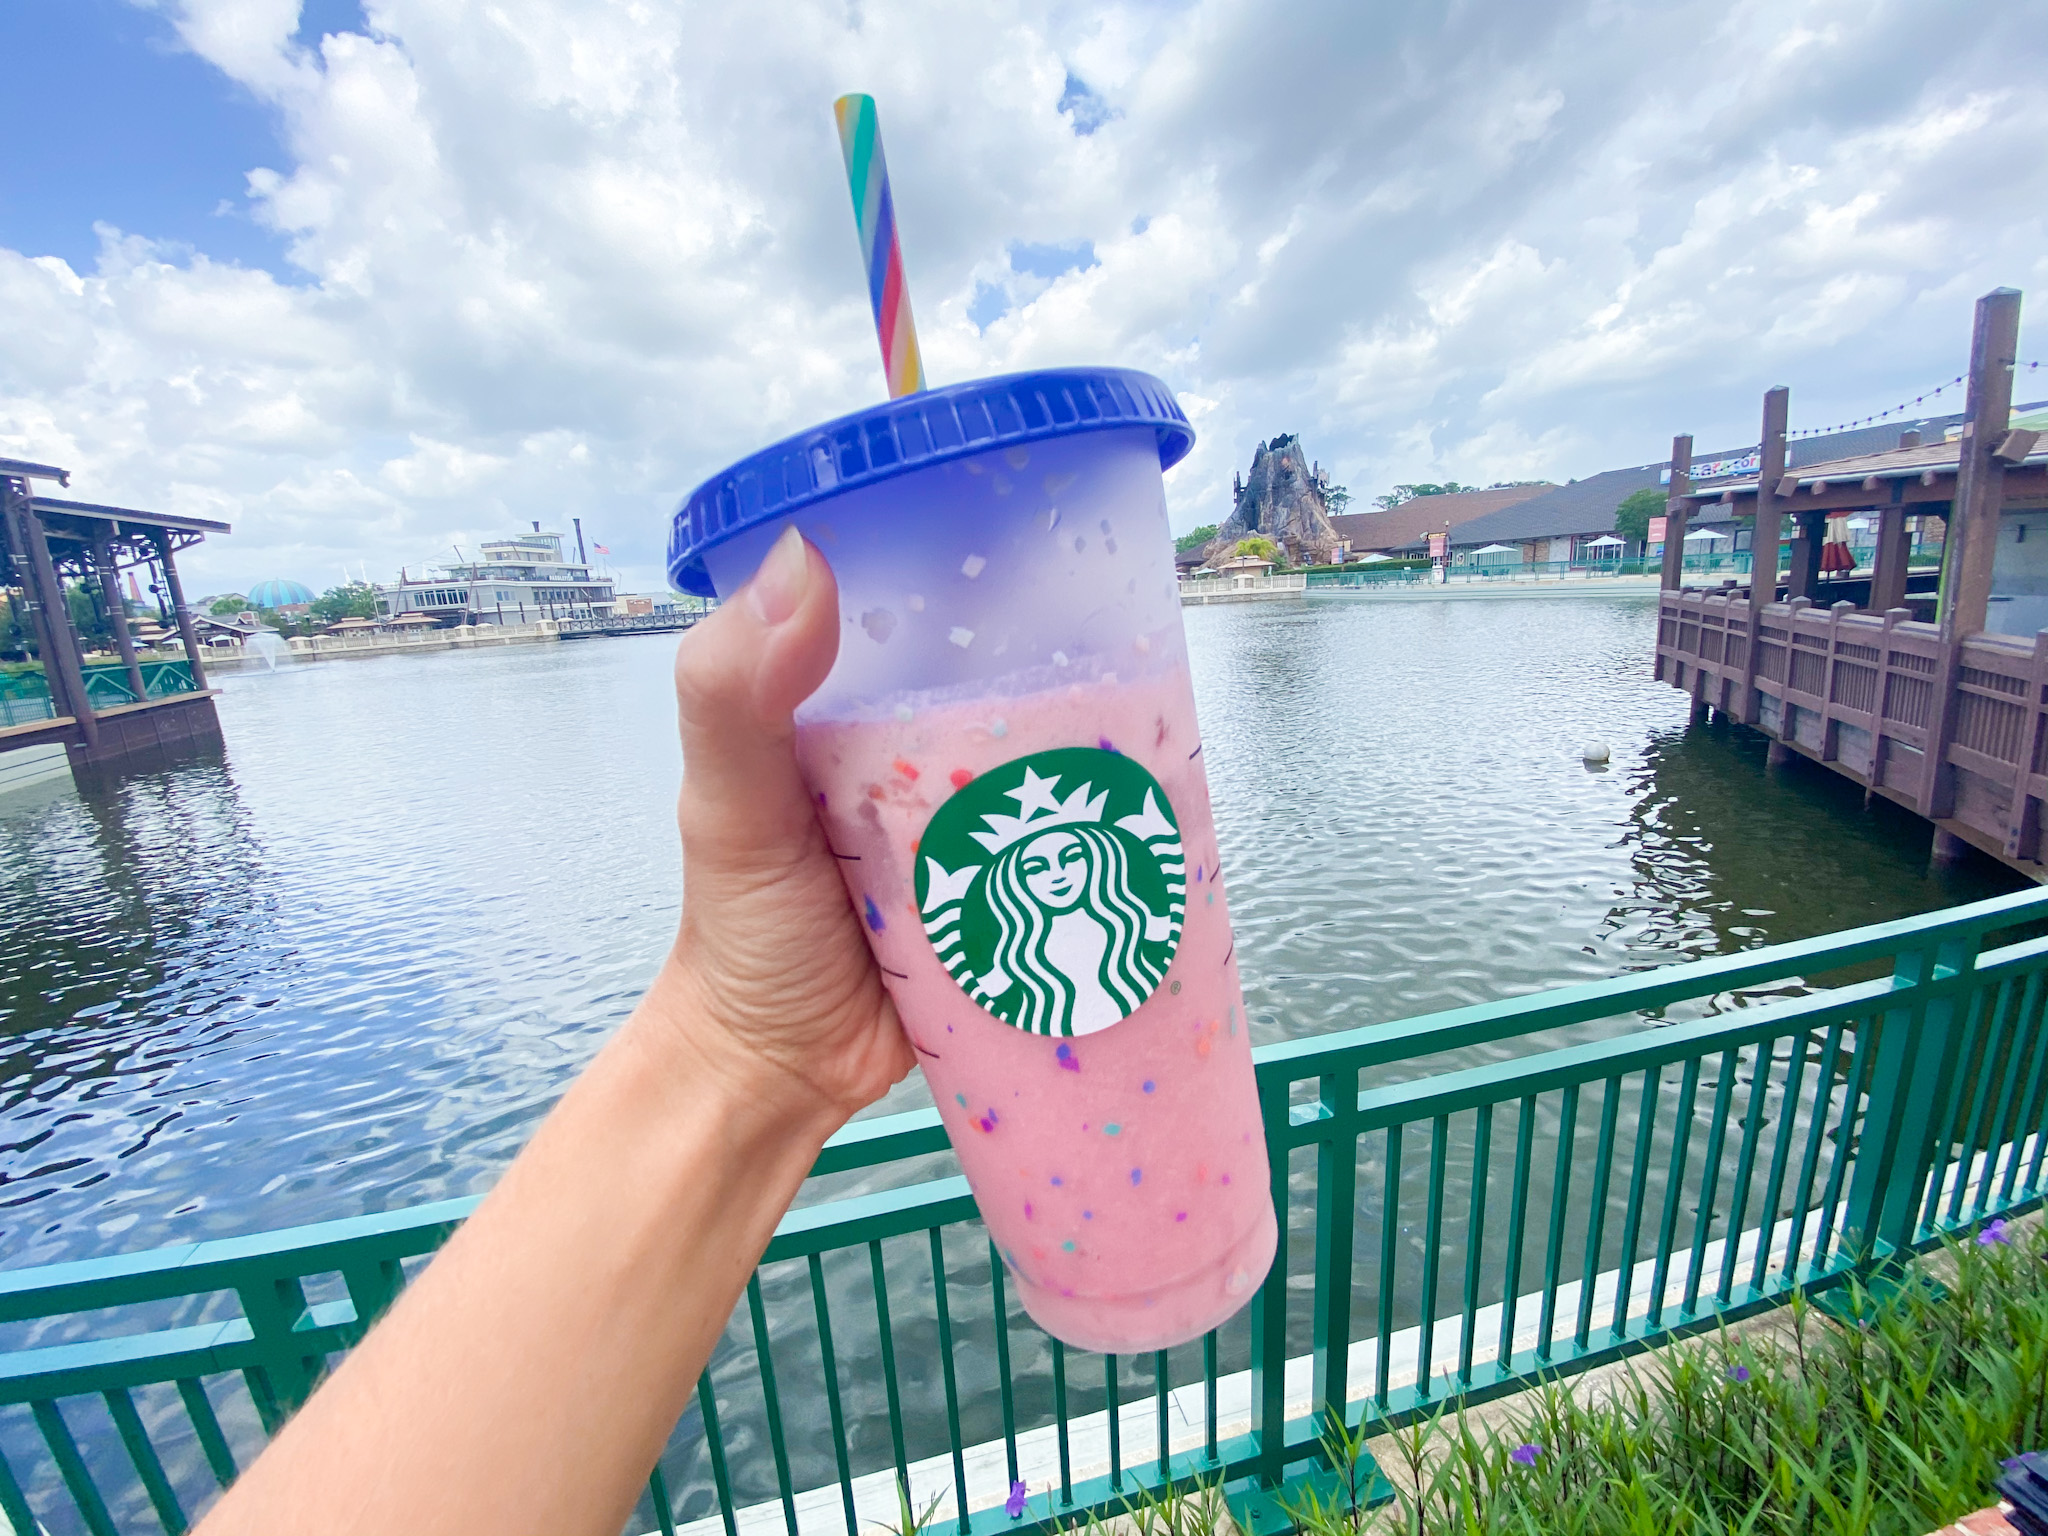 Starbucks Focuses on Love with New Cup and Drink